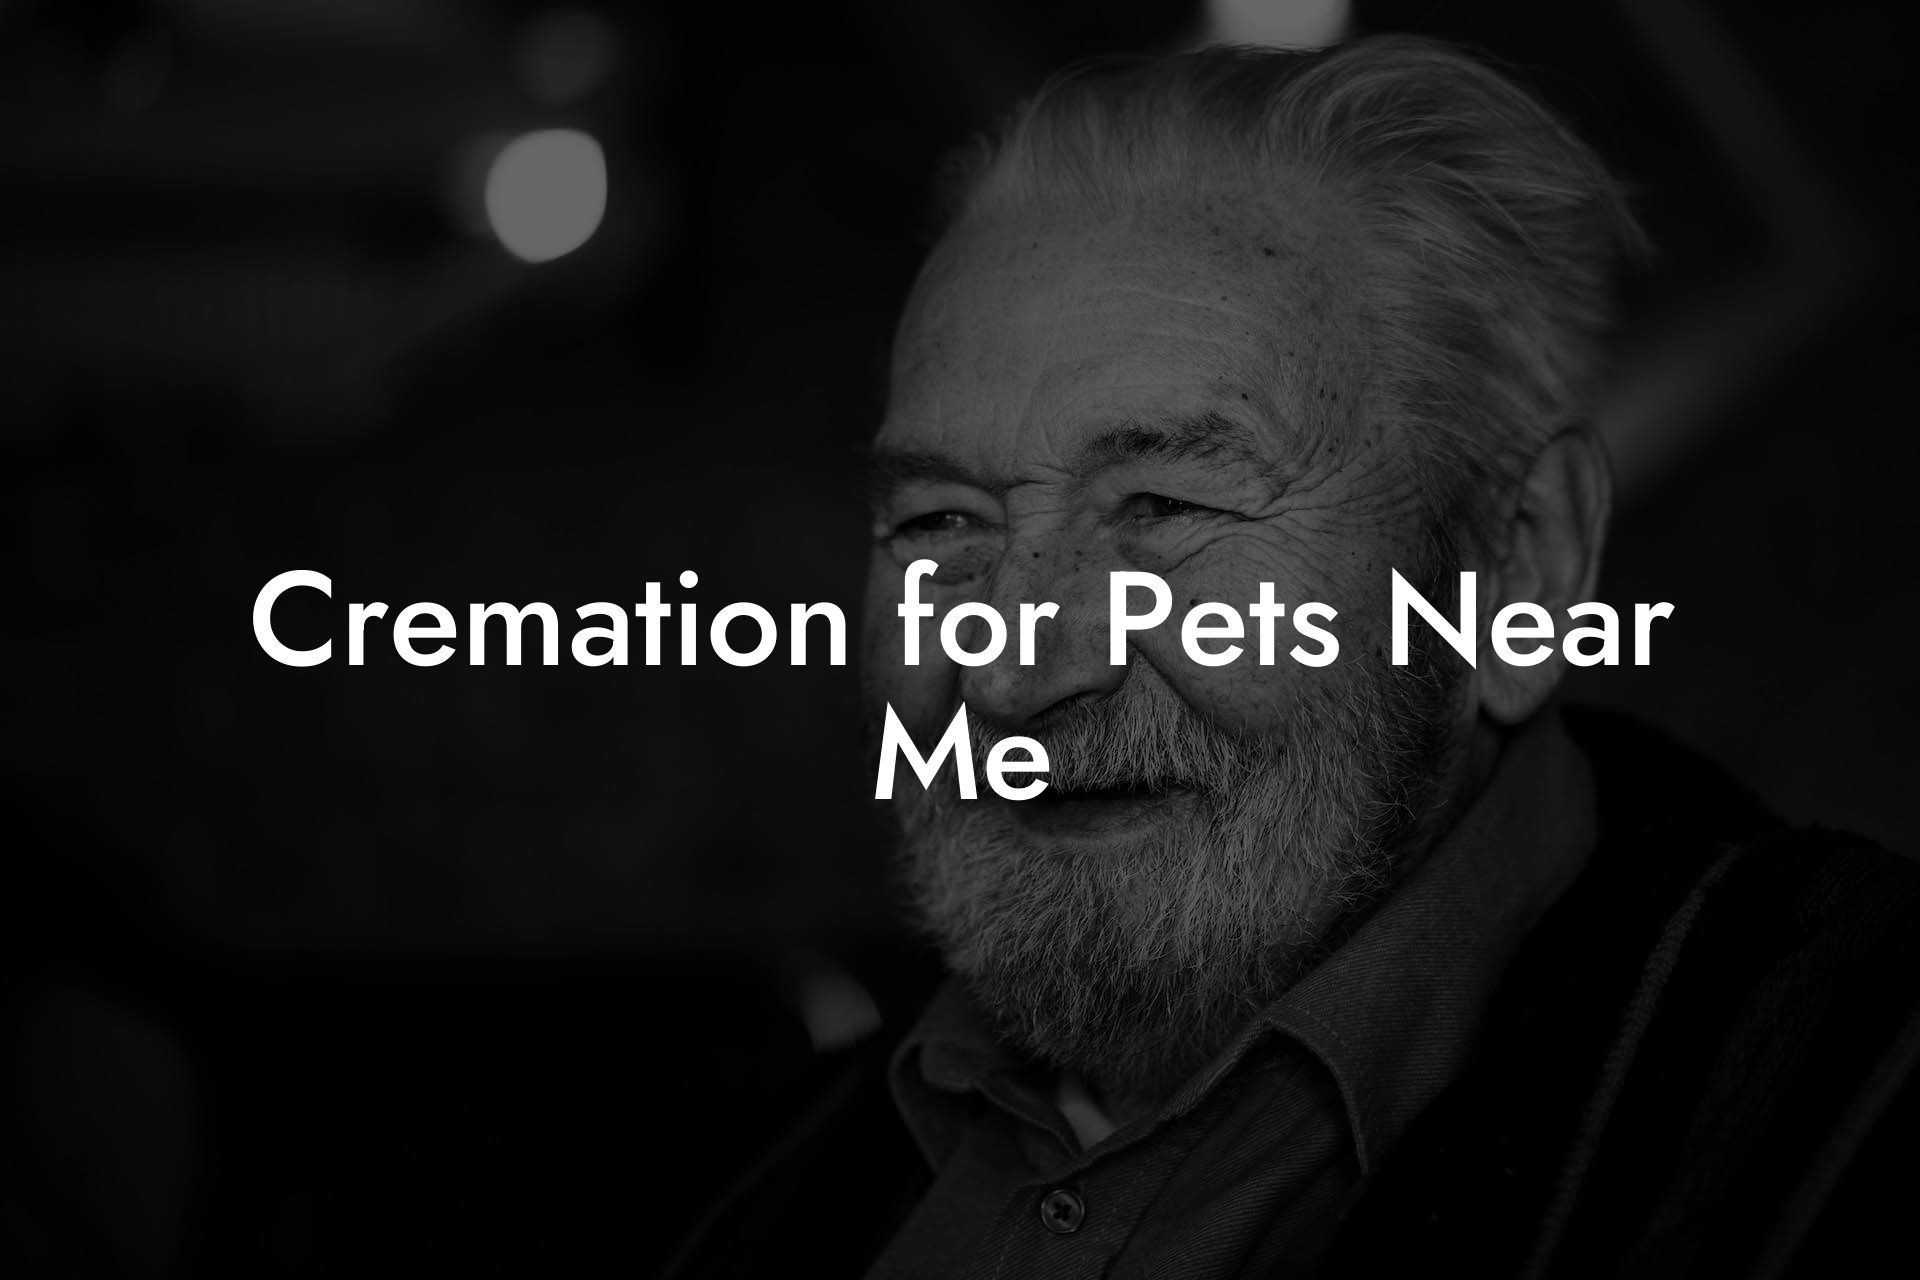 Cremation for Pets Near Me